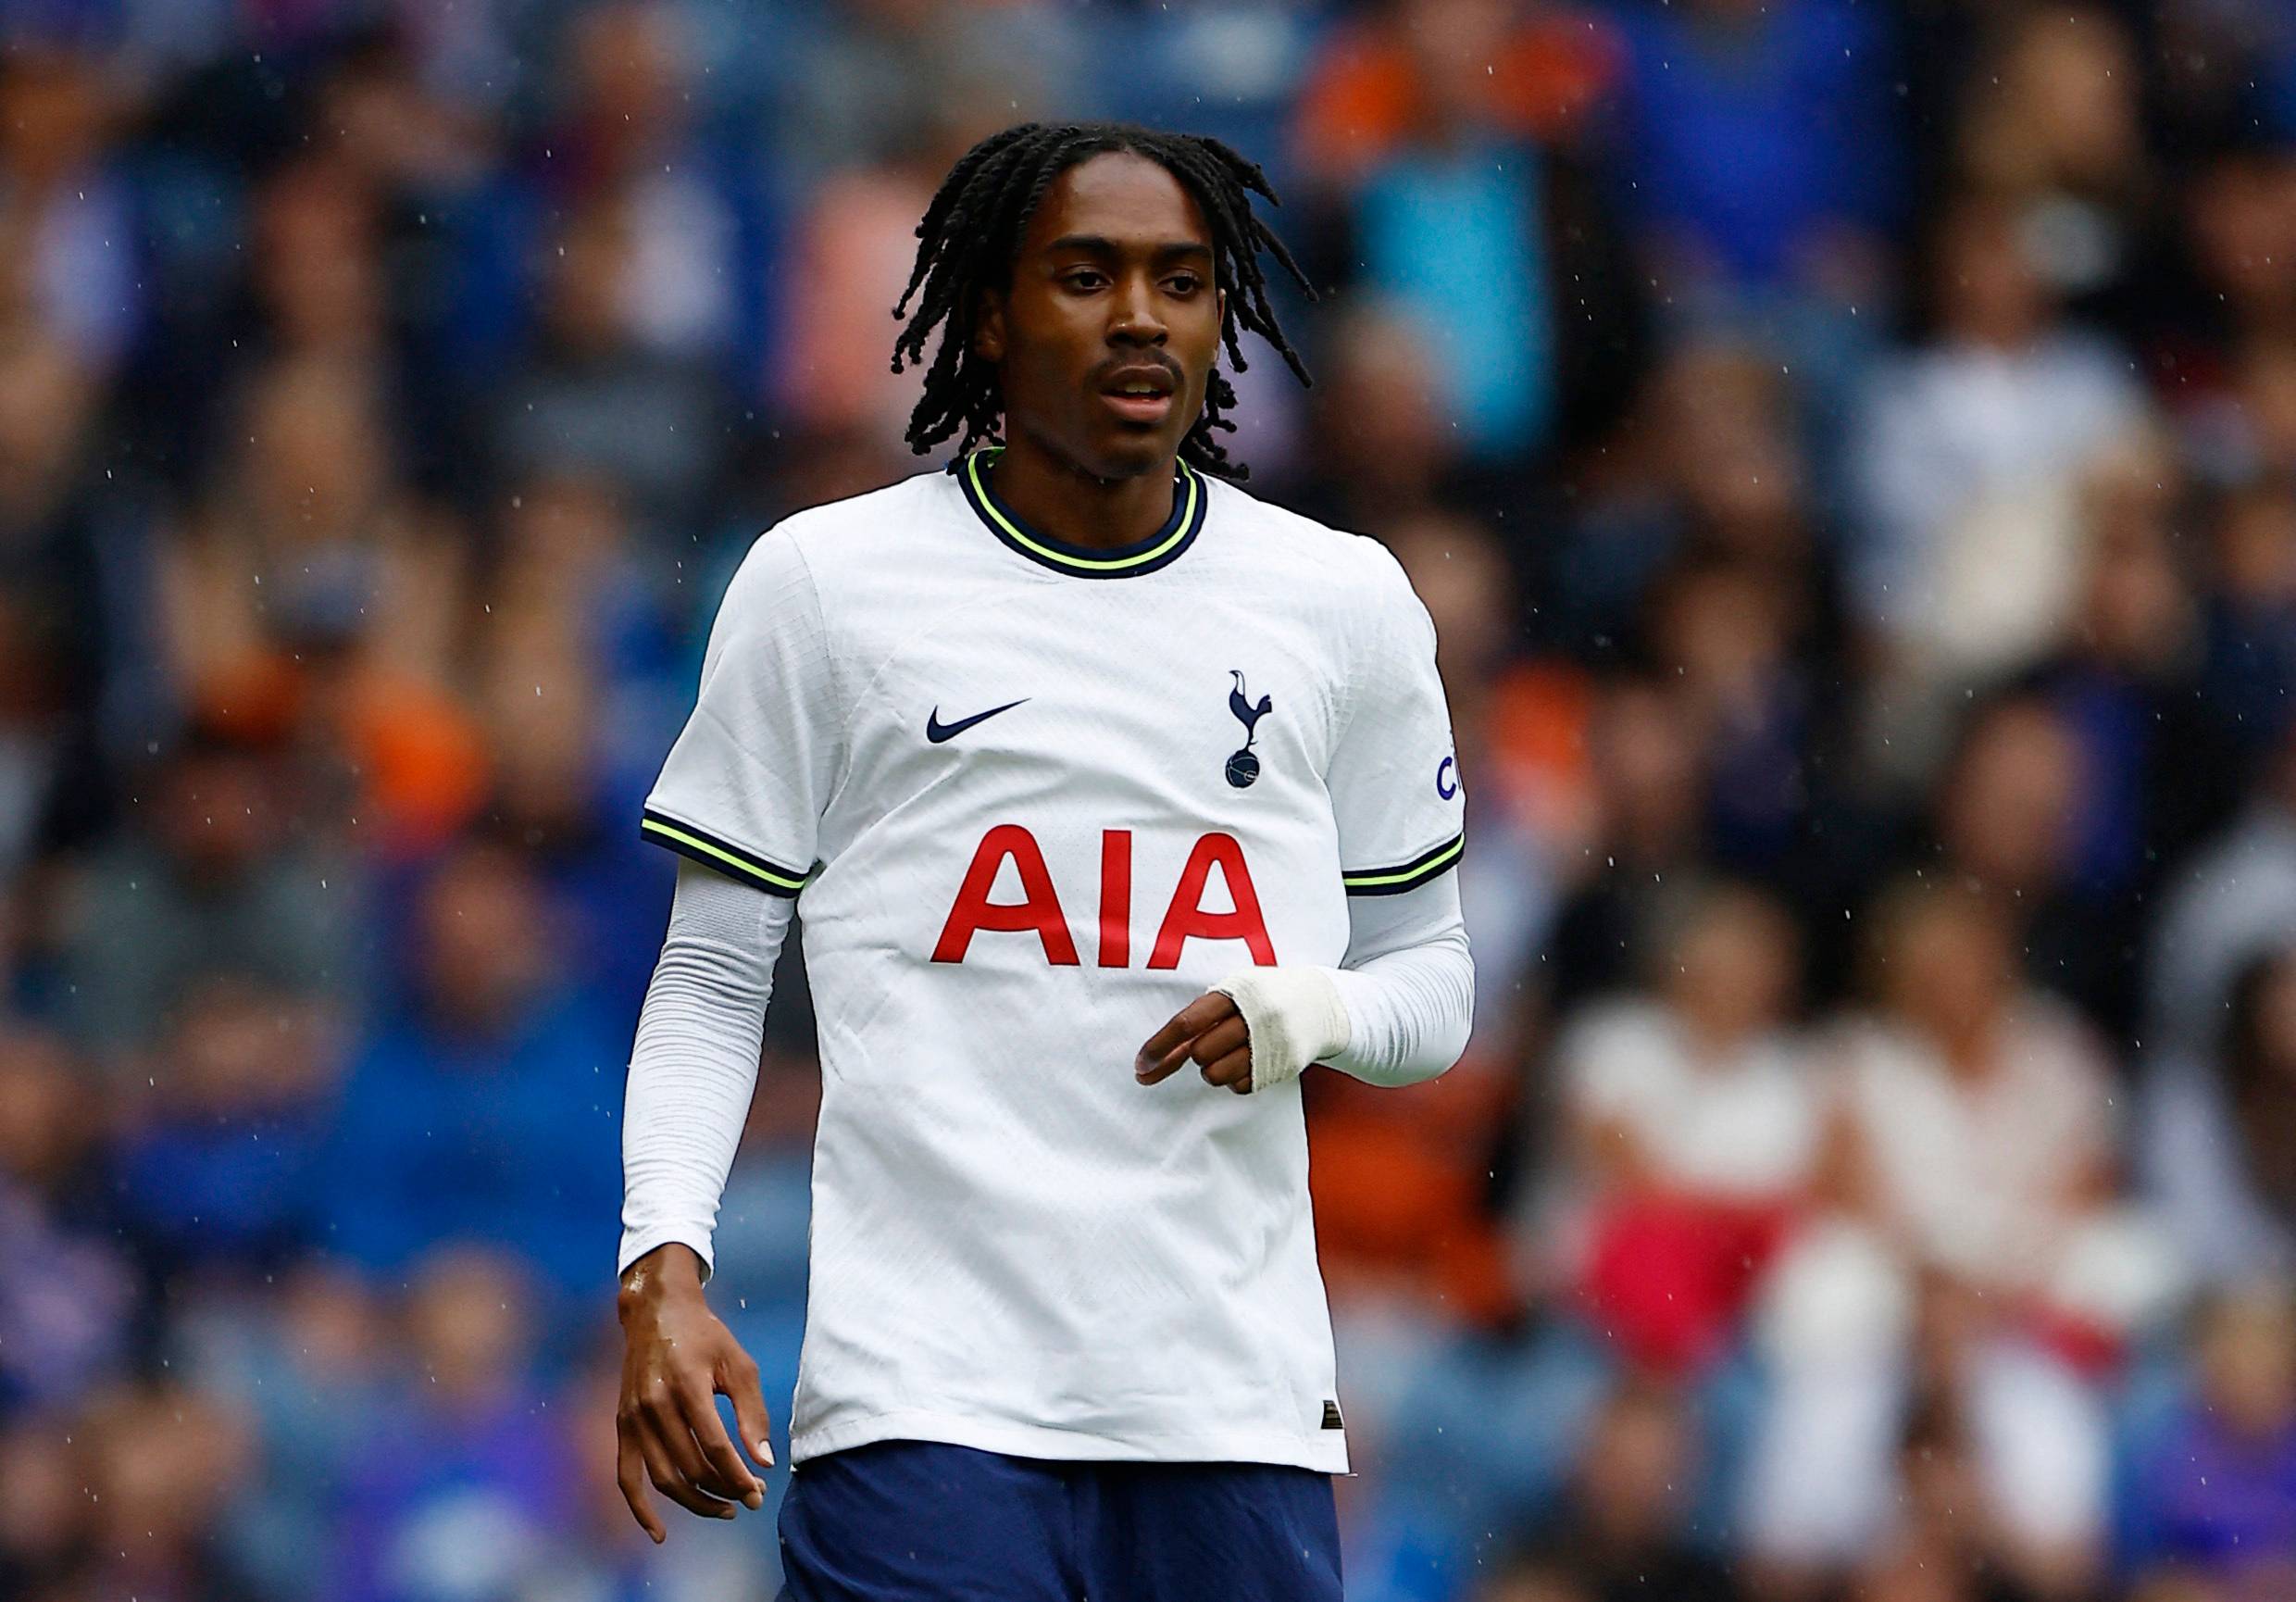 Southampton interested in loan deal for Djed Spence - Premier League News